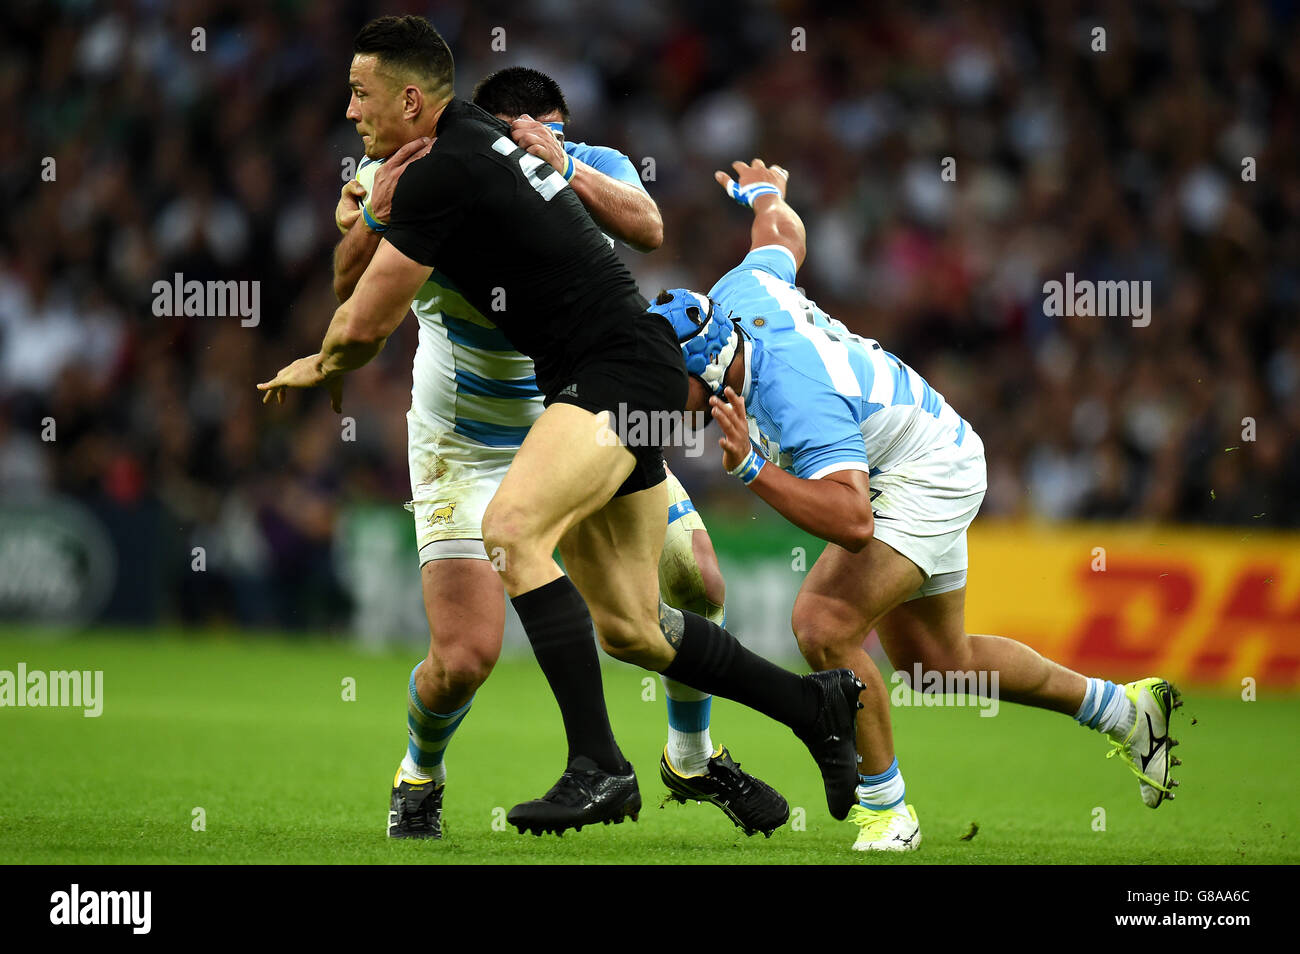 New Zealand's Sonny Bill Williams (centre) is tackled by Argentina's Ramino Herrera (left) and Lucas Noguera during the Rugby World Cup match at Wembley Stadium, London. PRESS ASSOCIATION Photo. Picture date: Sunday September 20, 2015. See PA story RUGBYU New Zealand. Photo credit should read: Andrew Matthews/PA Wire. Stock Photo